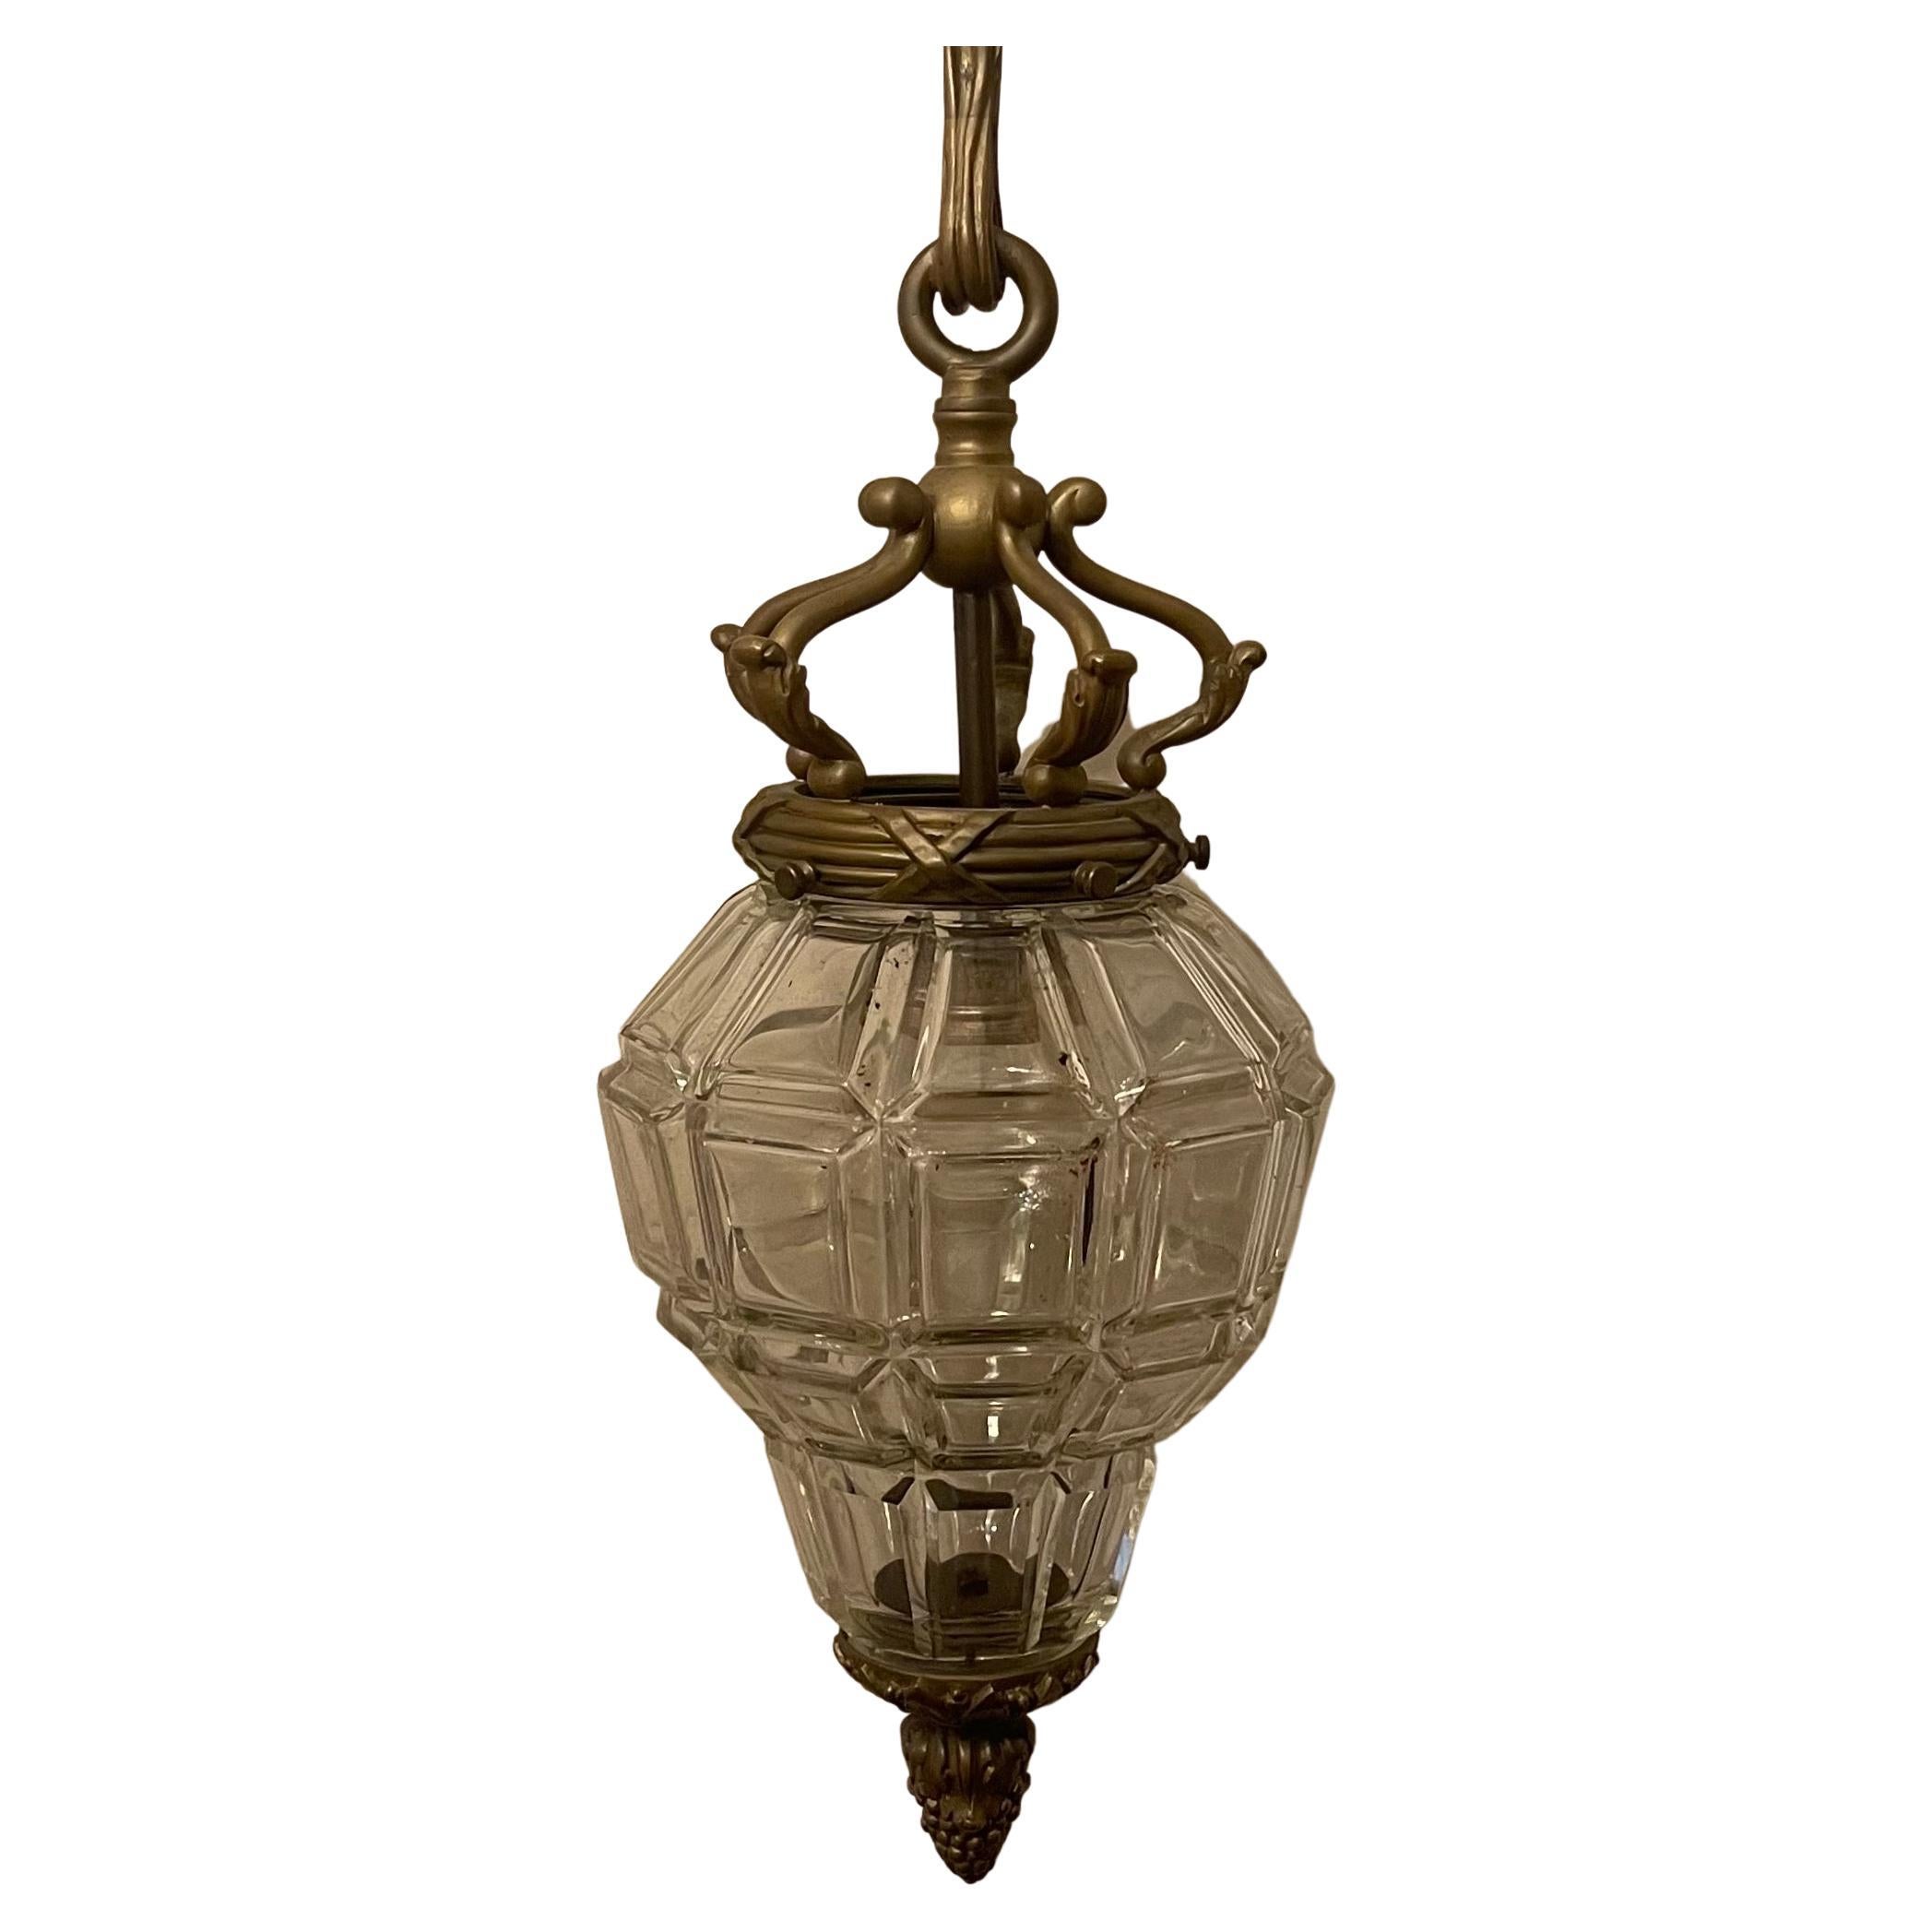 A Wonderful Gilt Bronze Tassel Beveled Panel Crystal / Glass Lantern Fixture In The Manner Of E.F. Caldwell, This Pendent Is Fitted With An Edison Light.